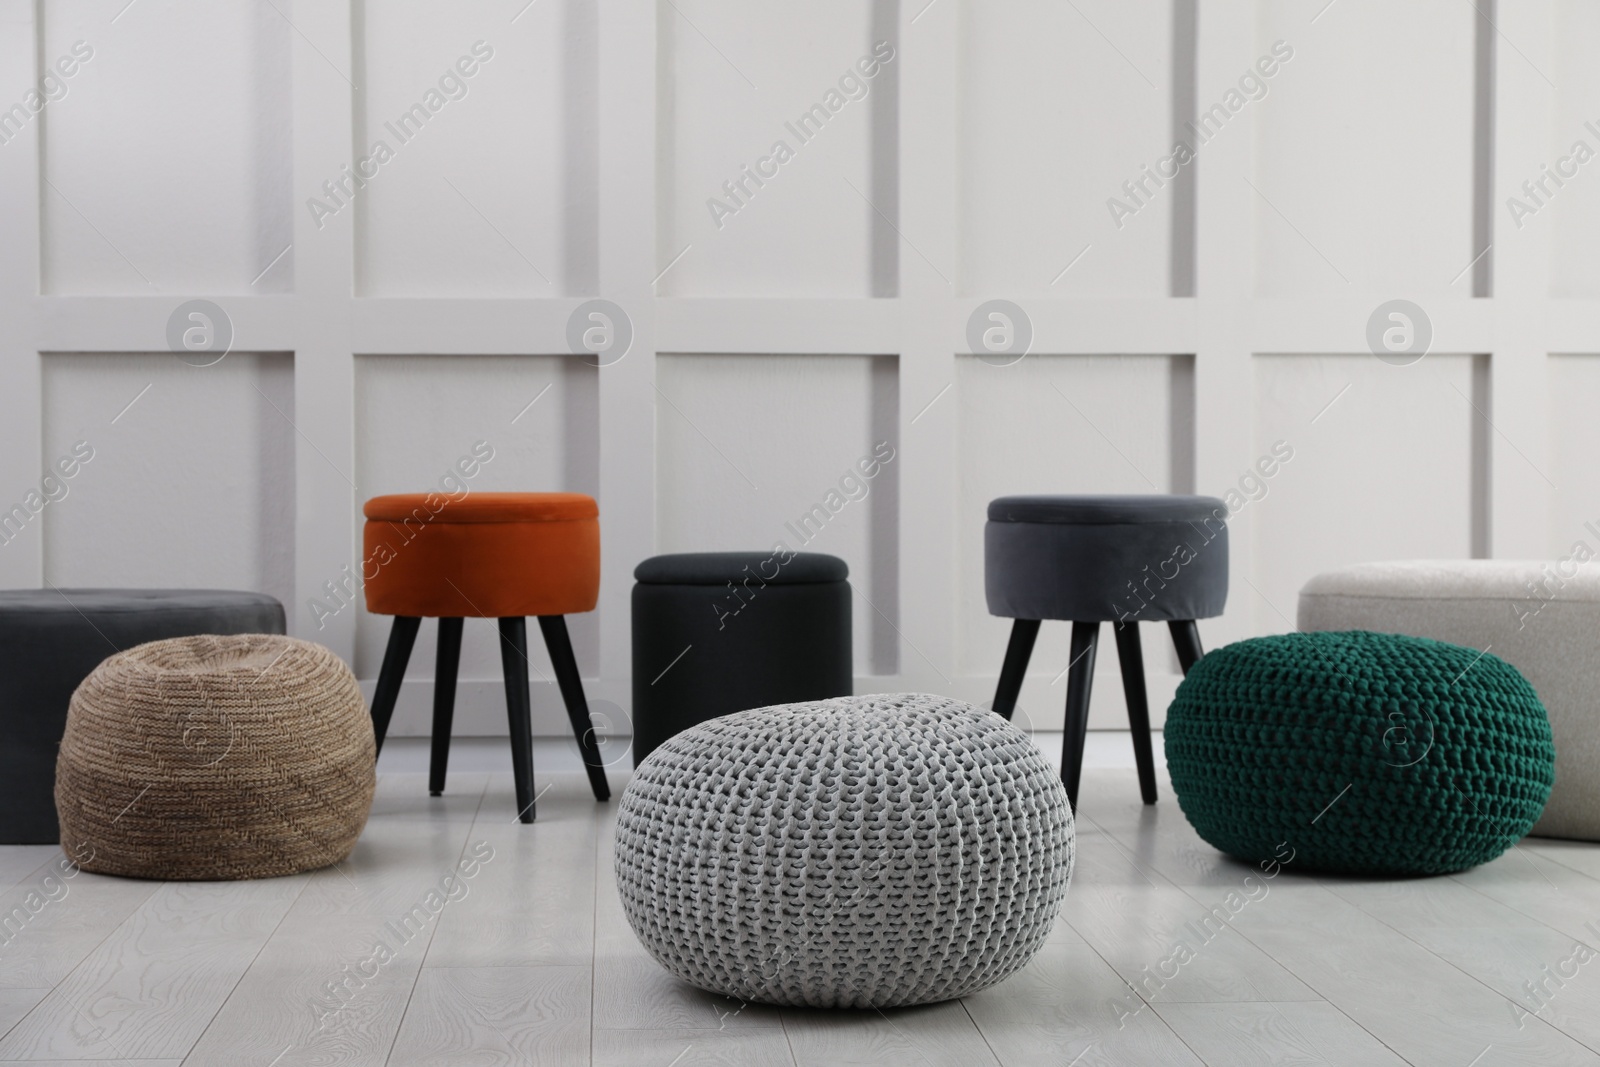 Photo of Different stylish poufs and ottomans near light wall